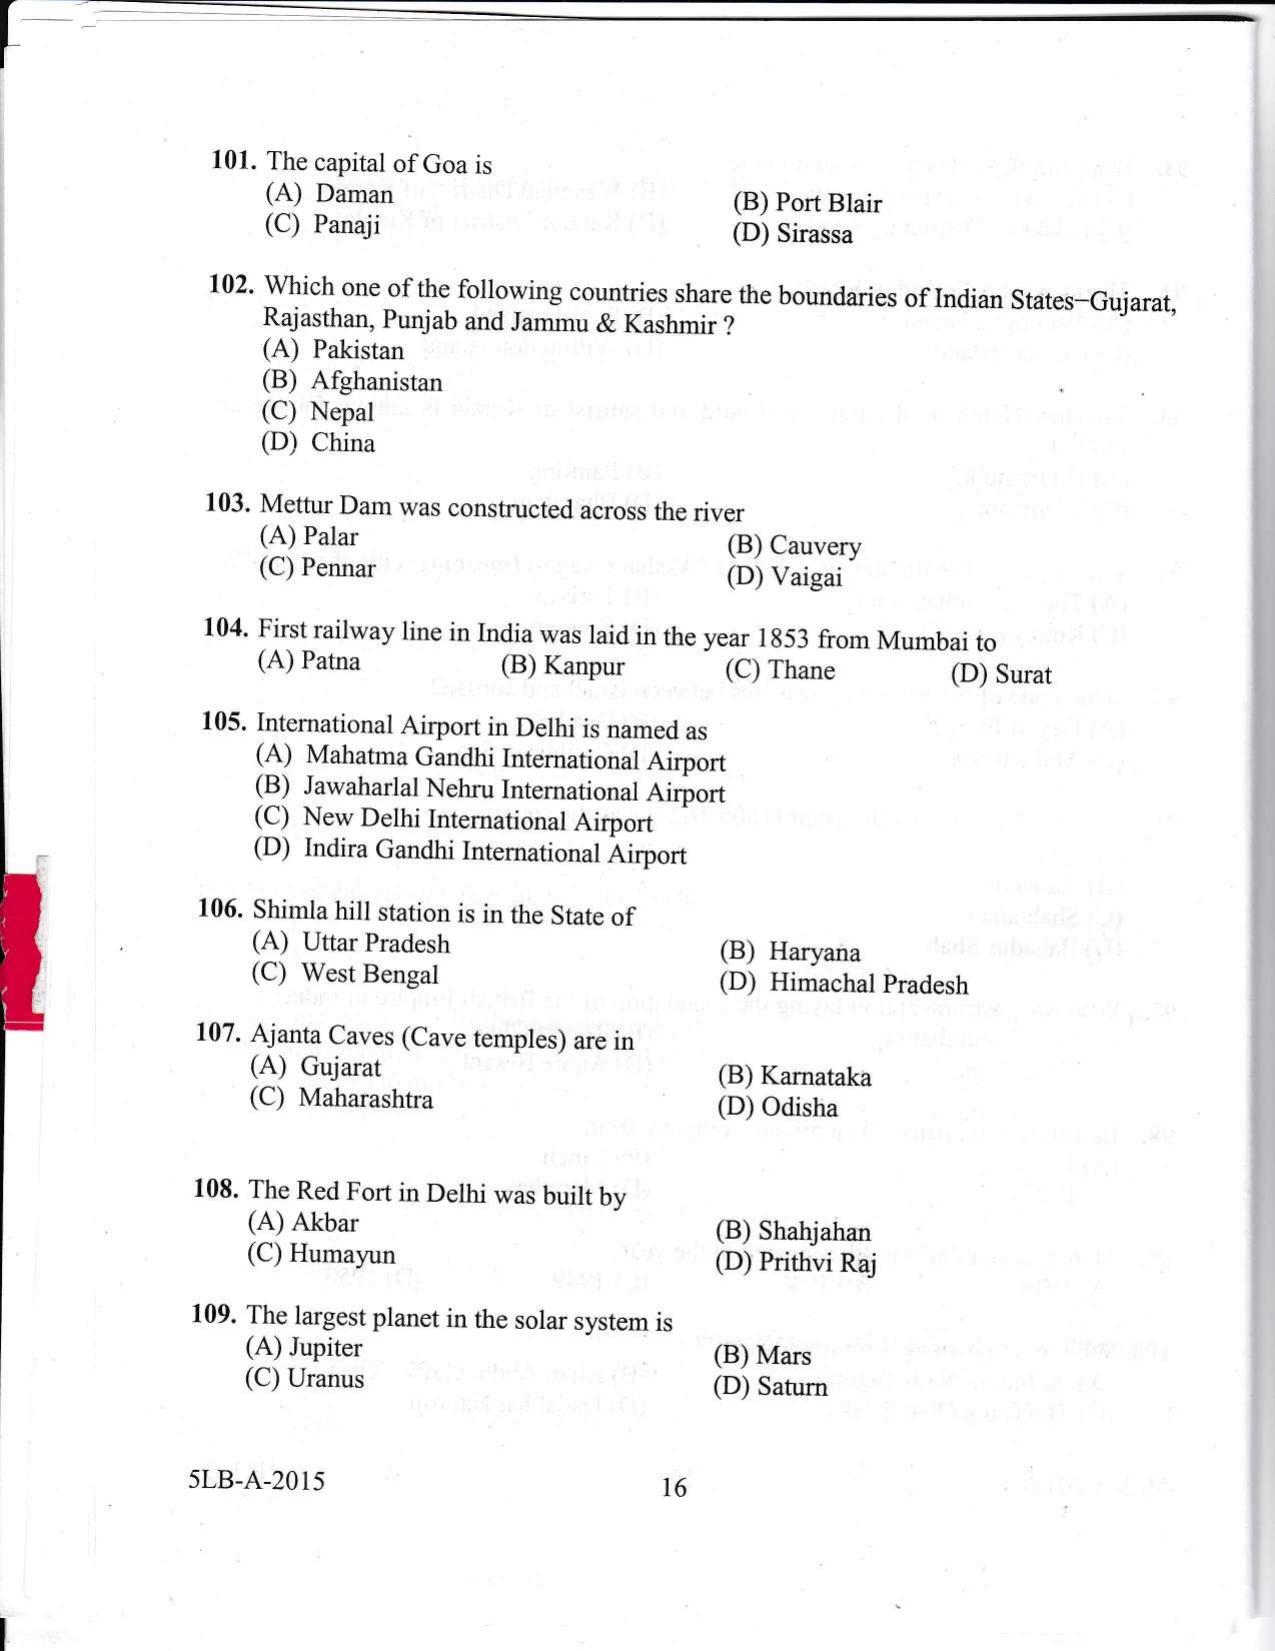 KLEE 5 Year LLB Exam 2015 Question Paper - Page 16